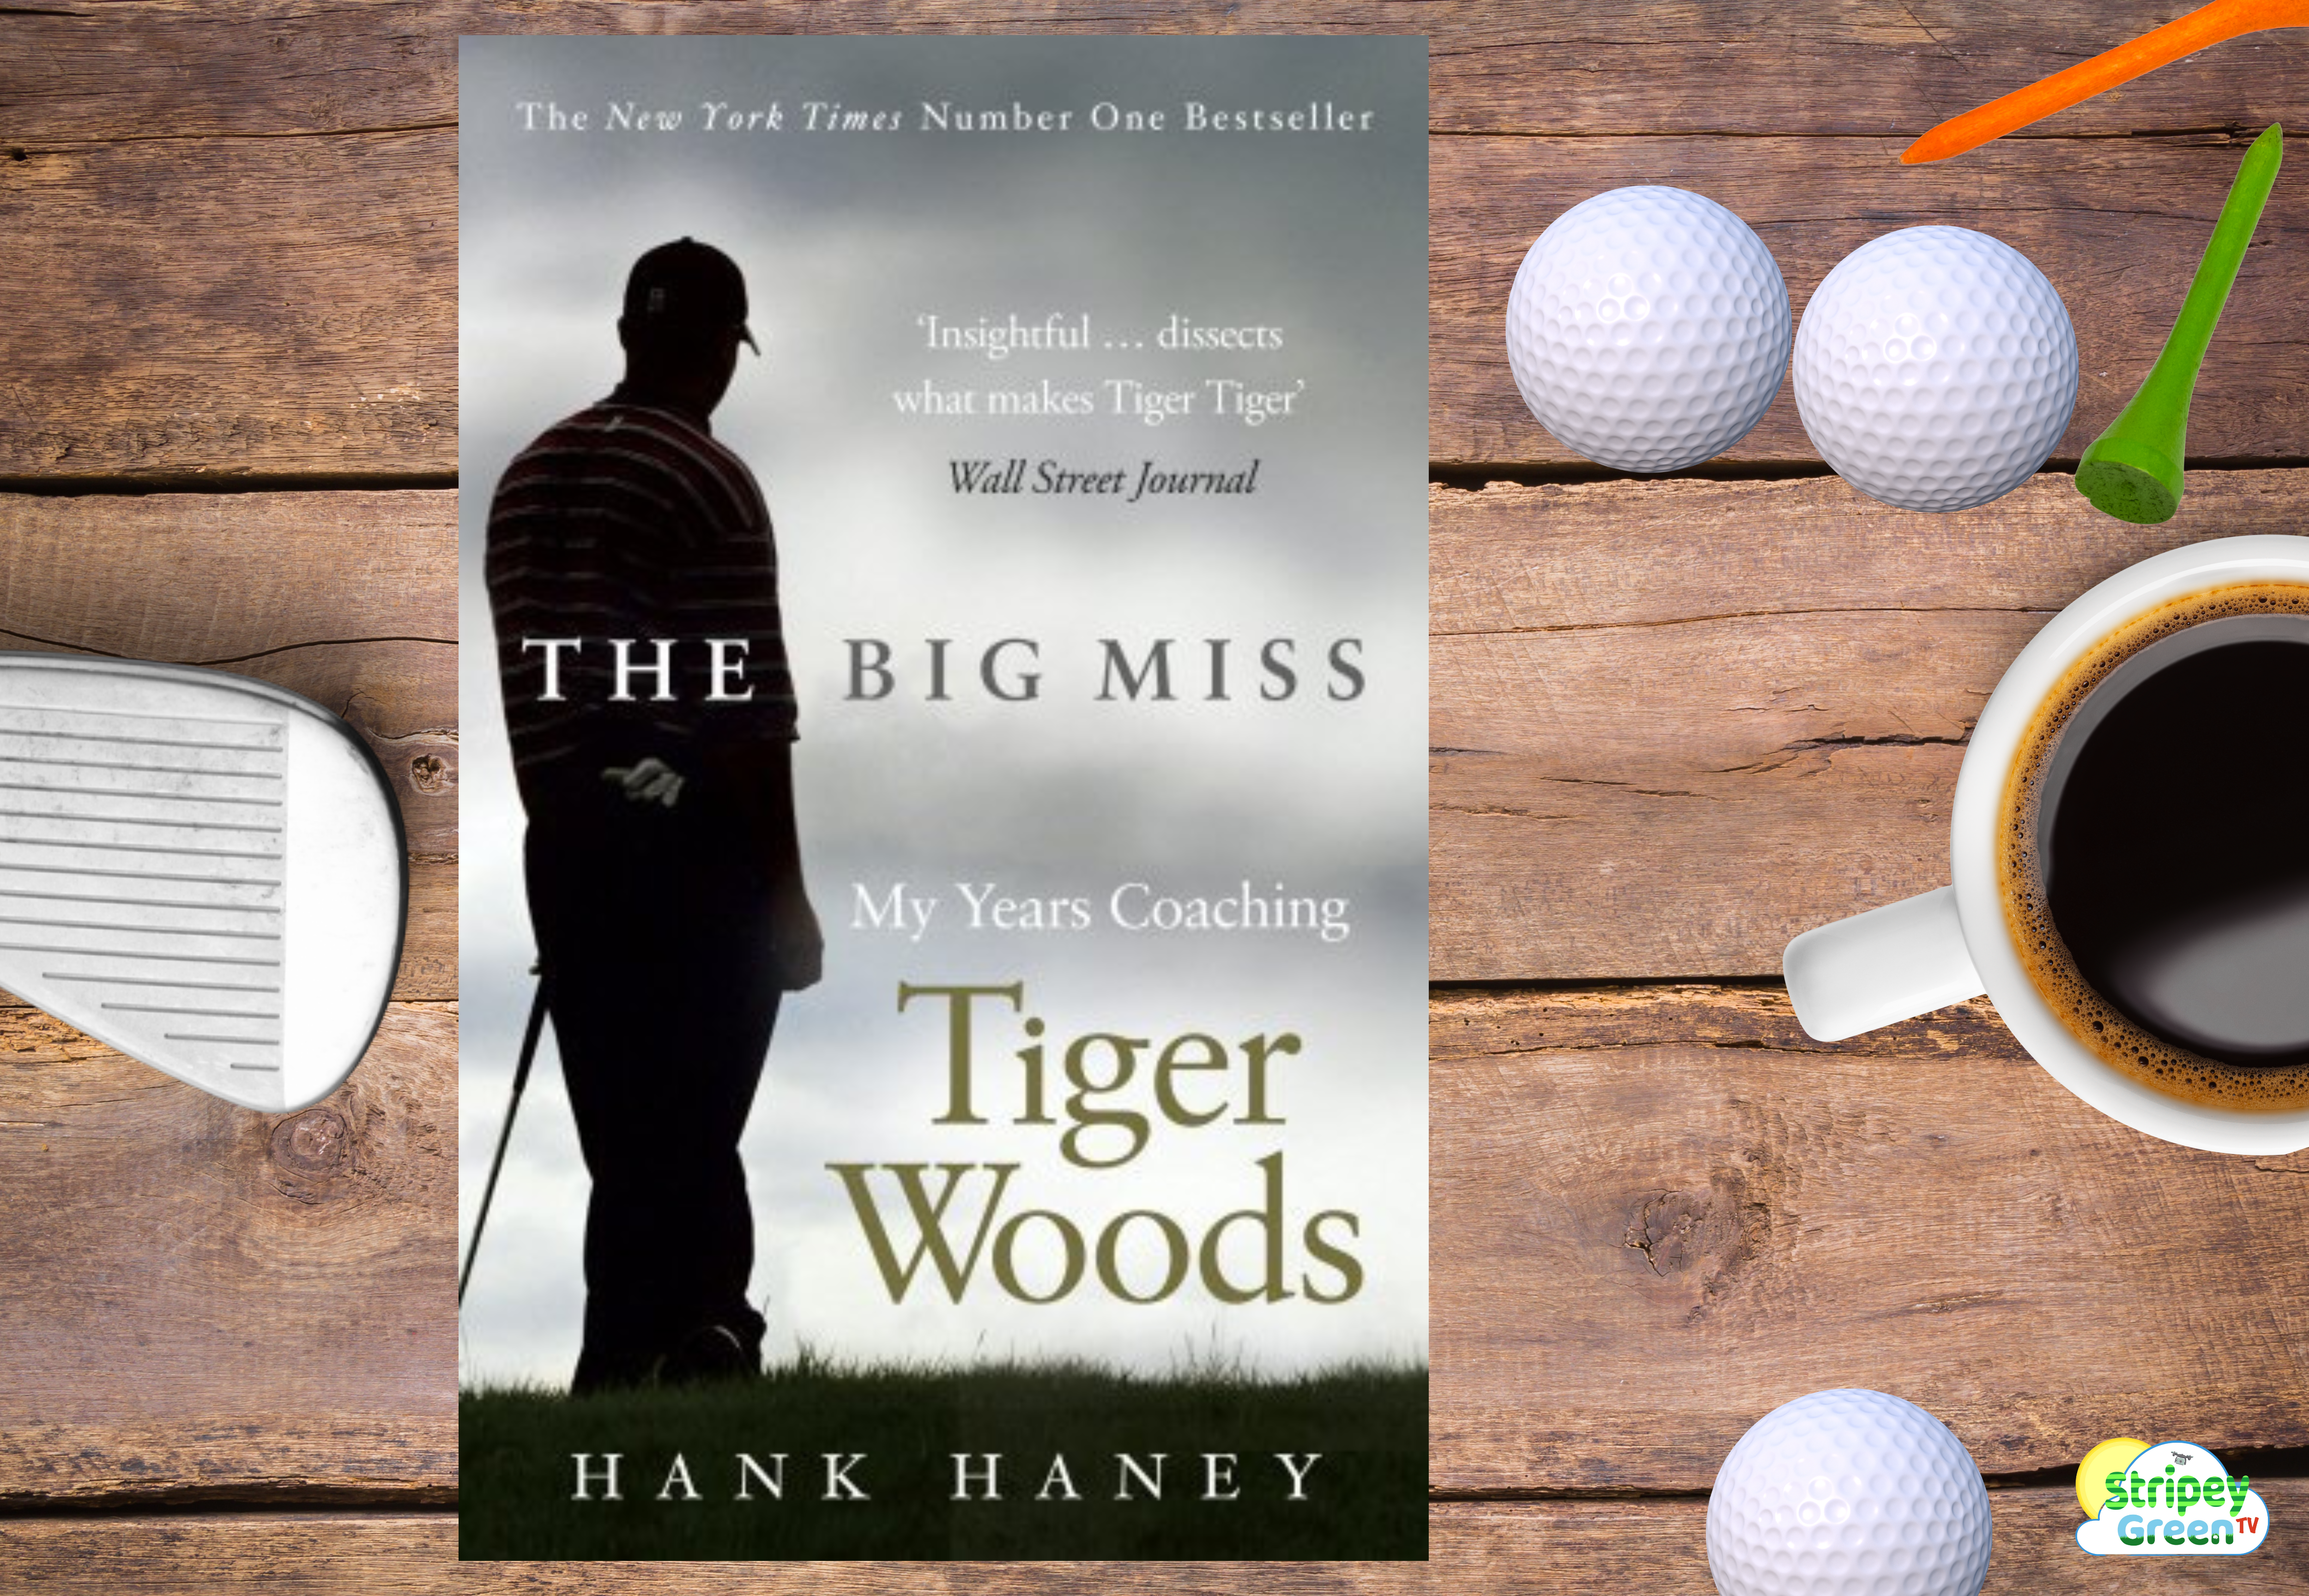 The Big Miss - My Years Coaching Tiger - Book Review